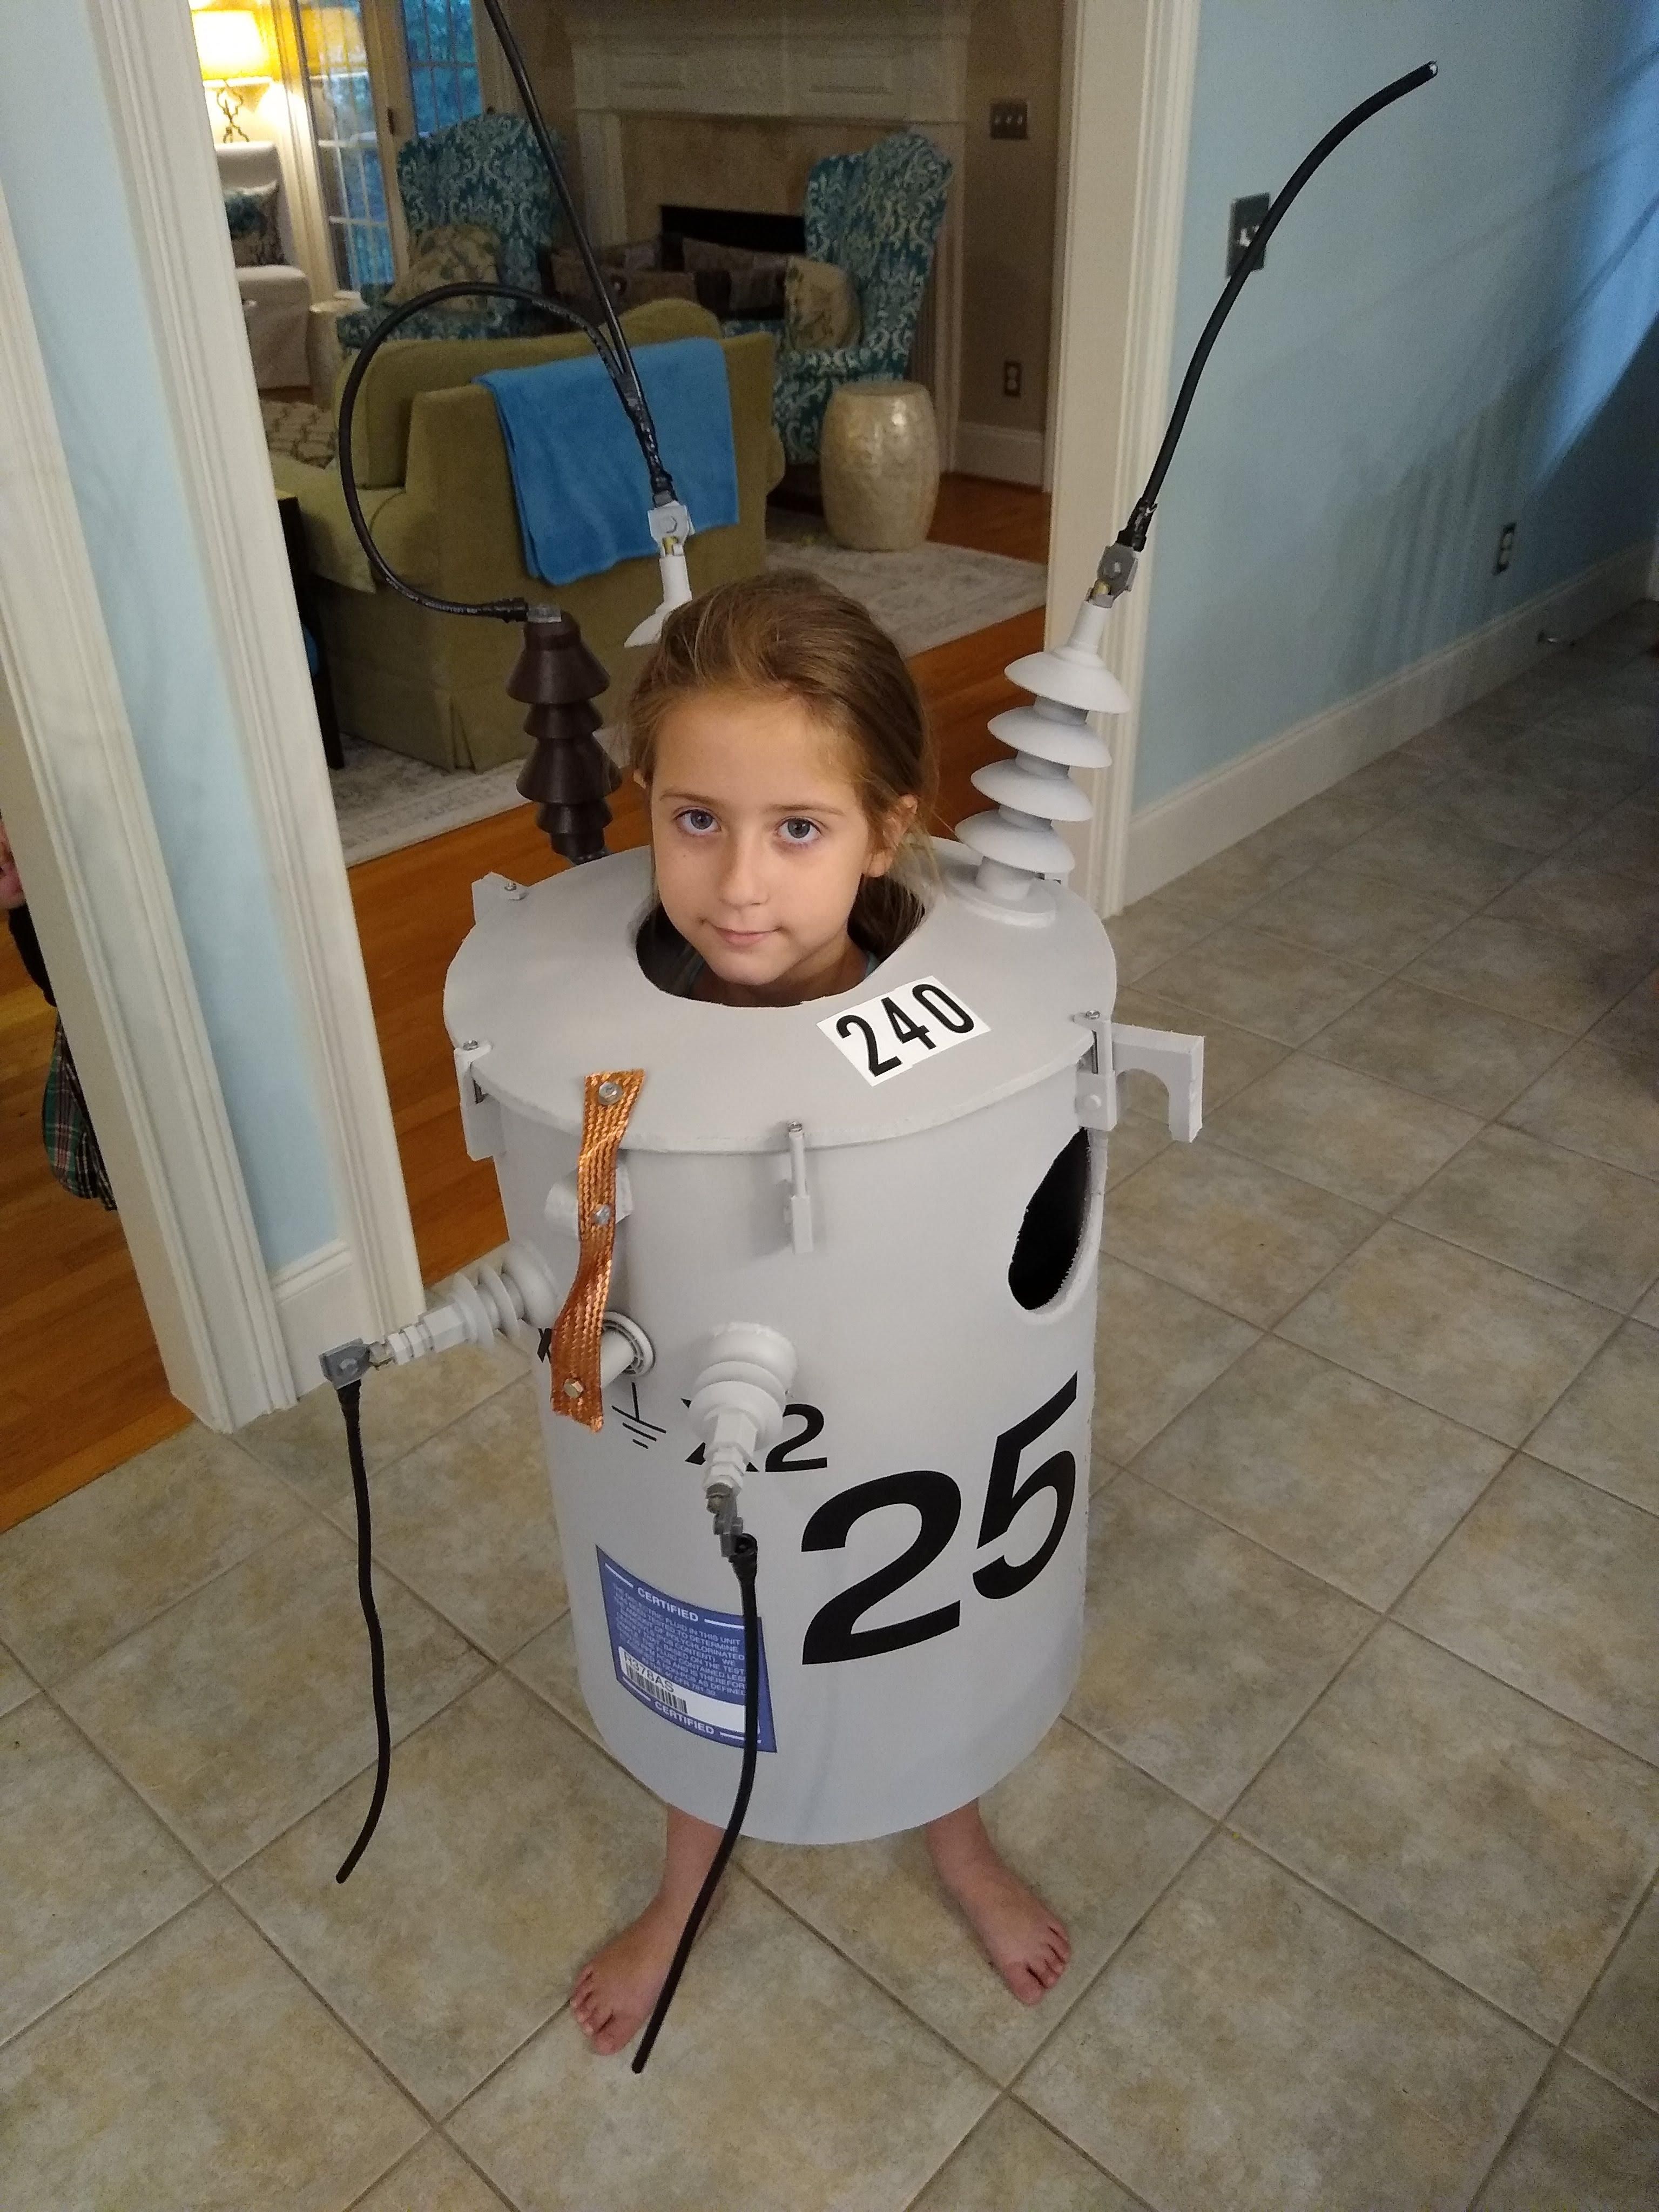 My daughter when she said she wanted to be a Transformer for Halloween.